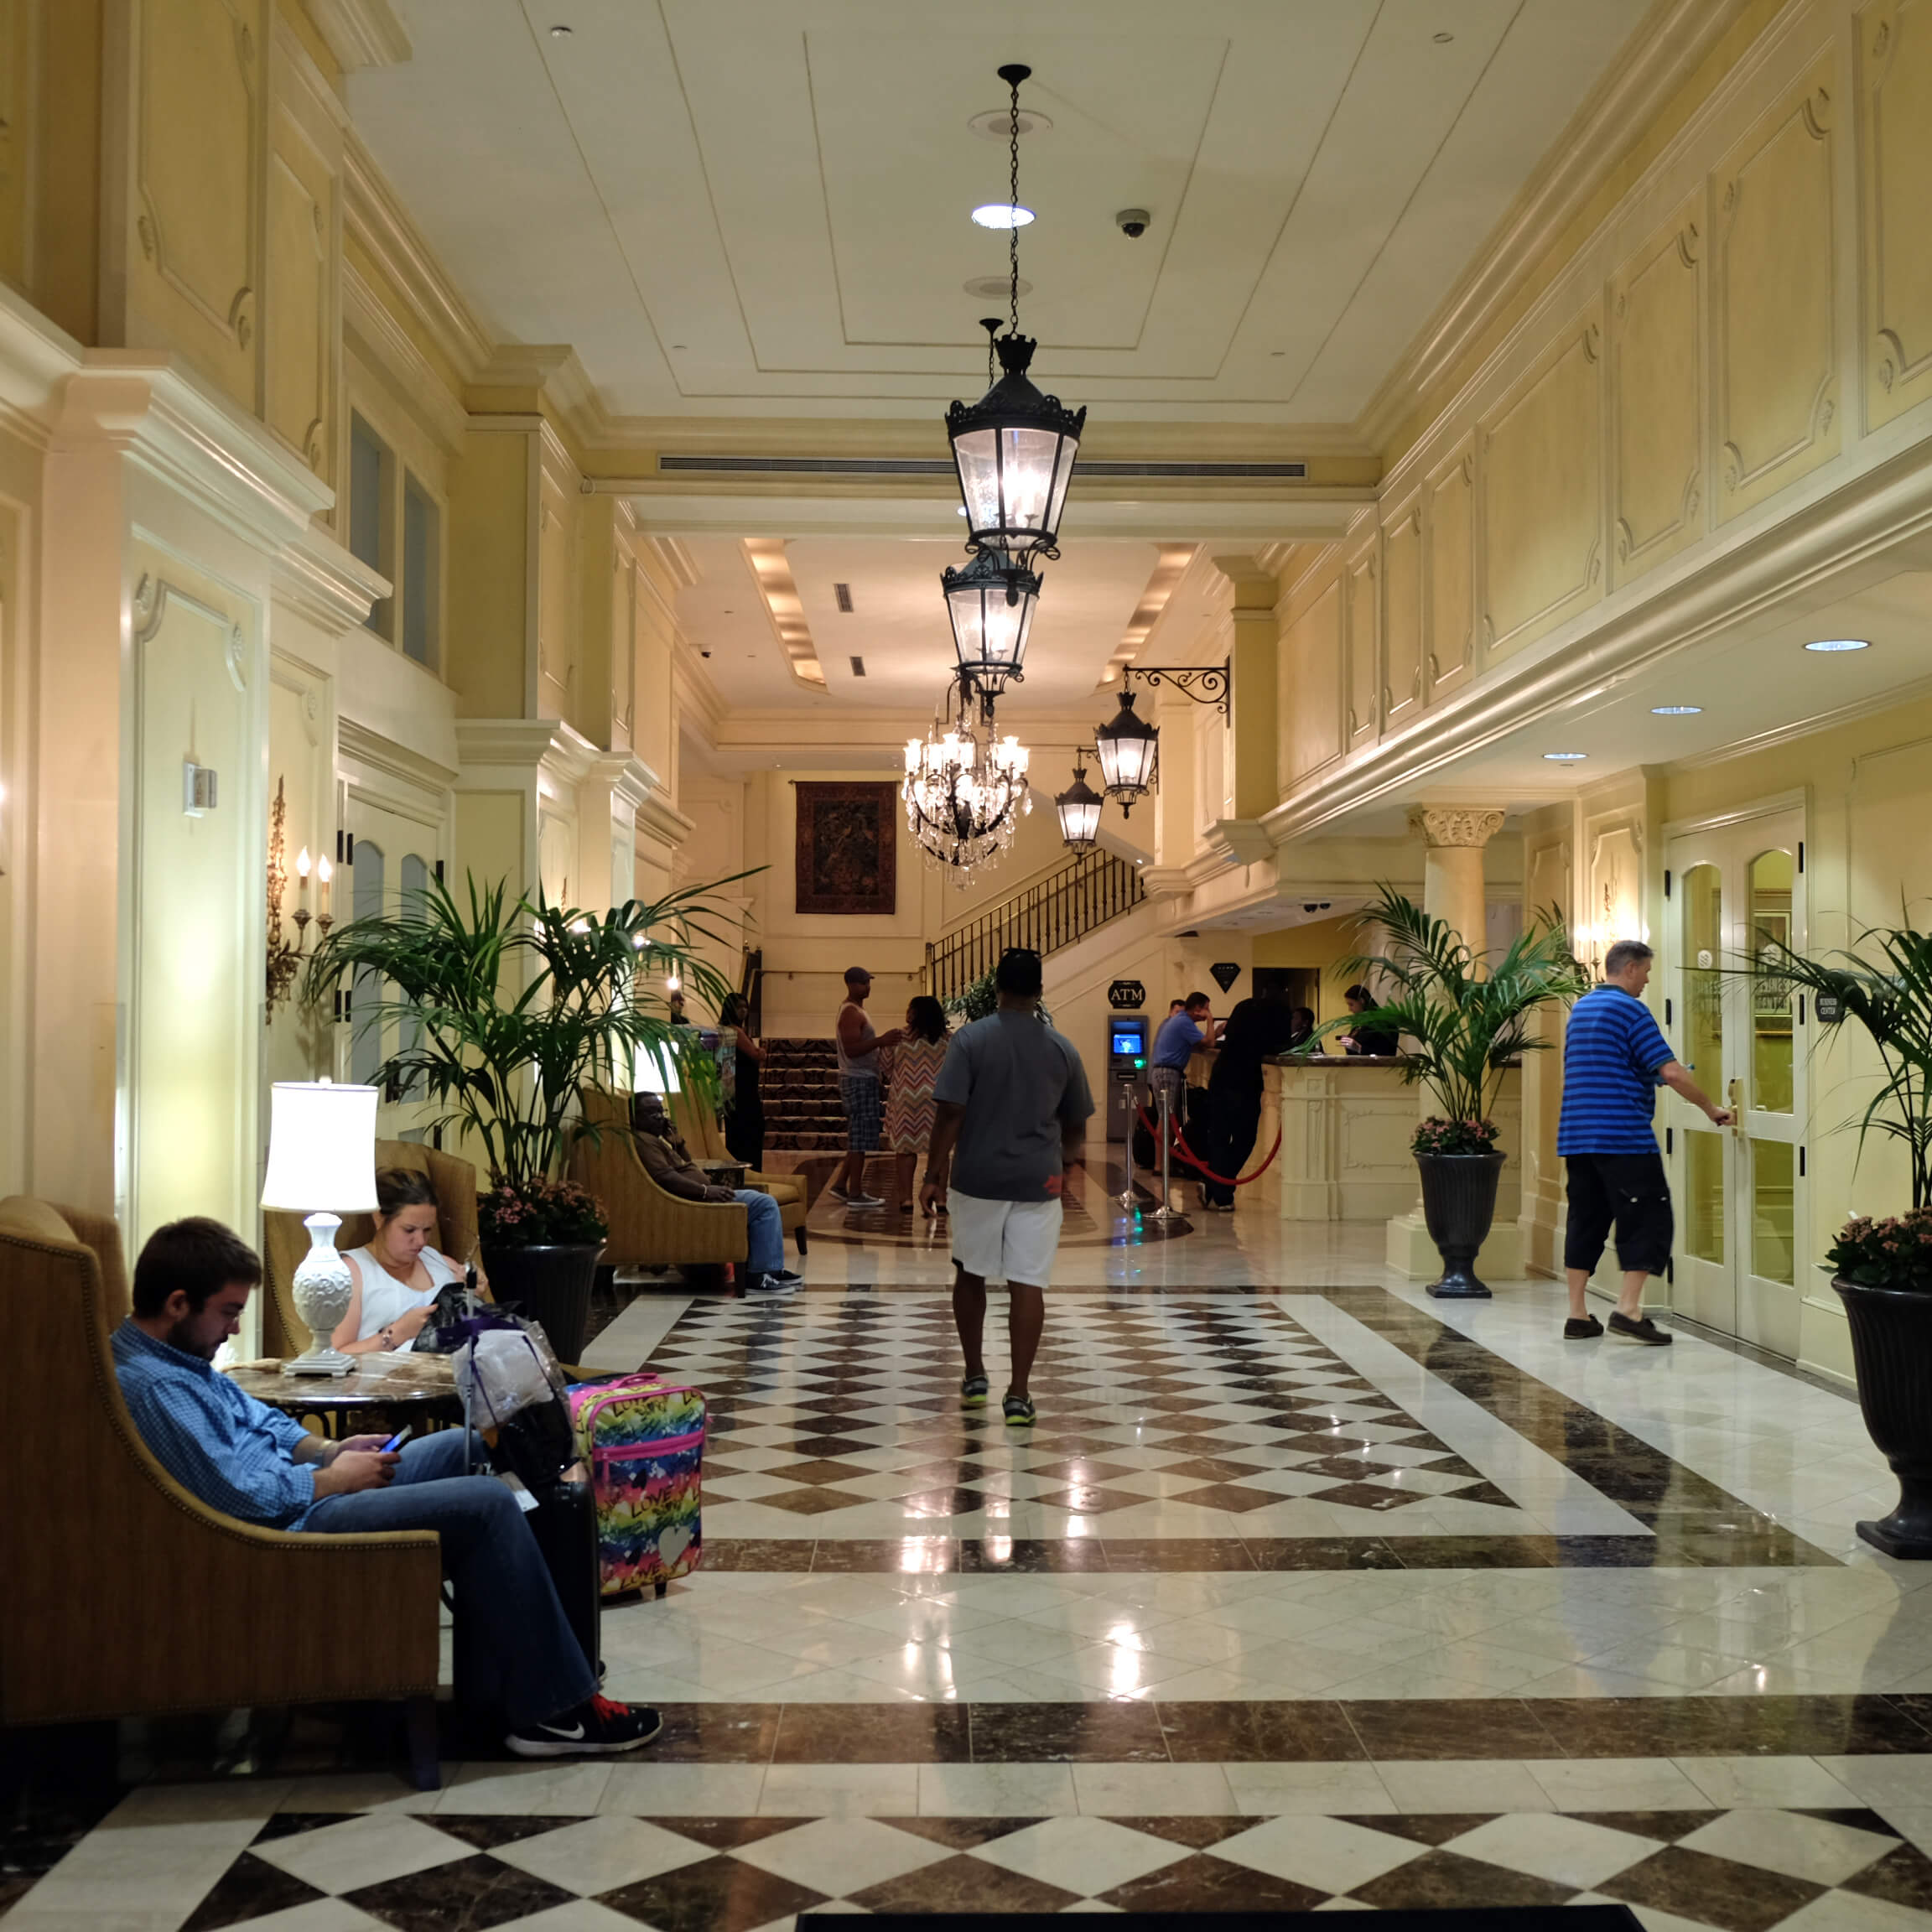 Lobby of the Crowne Plaza Hotel, Canal Street, New Orleans